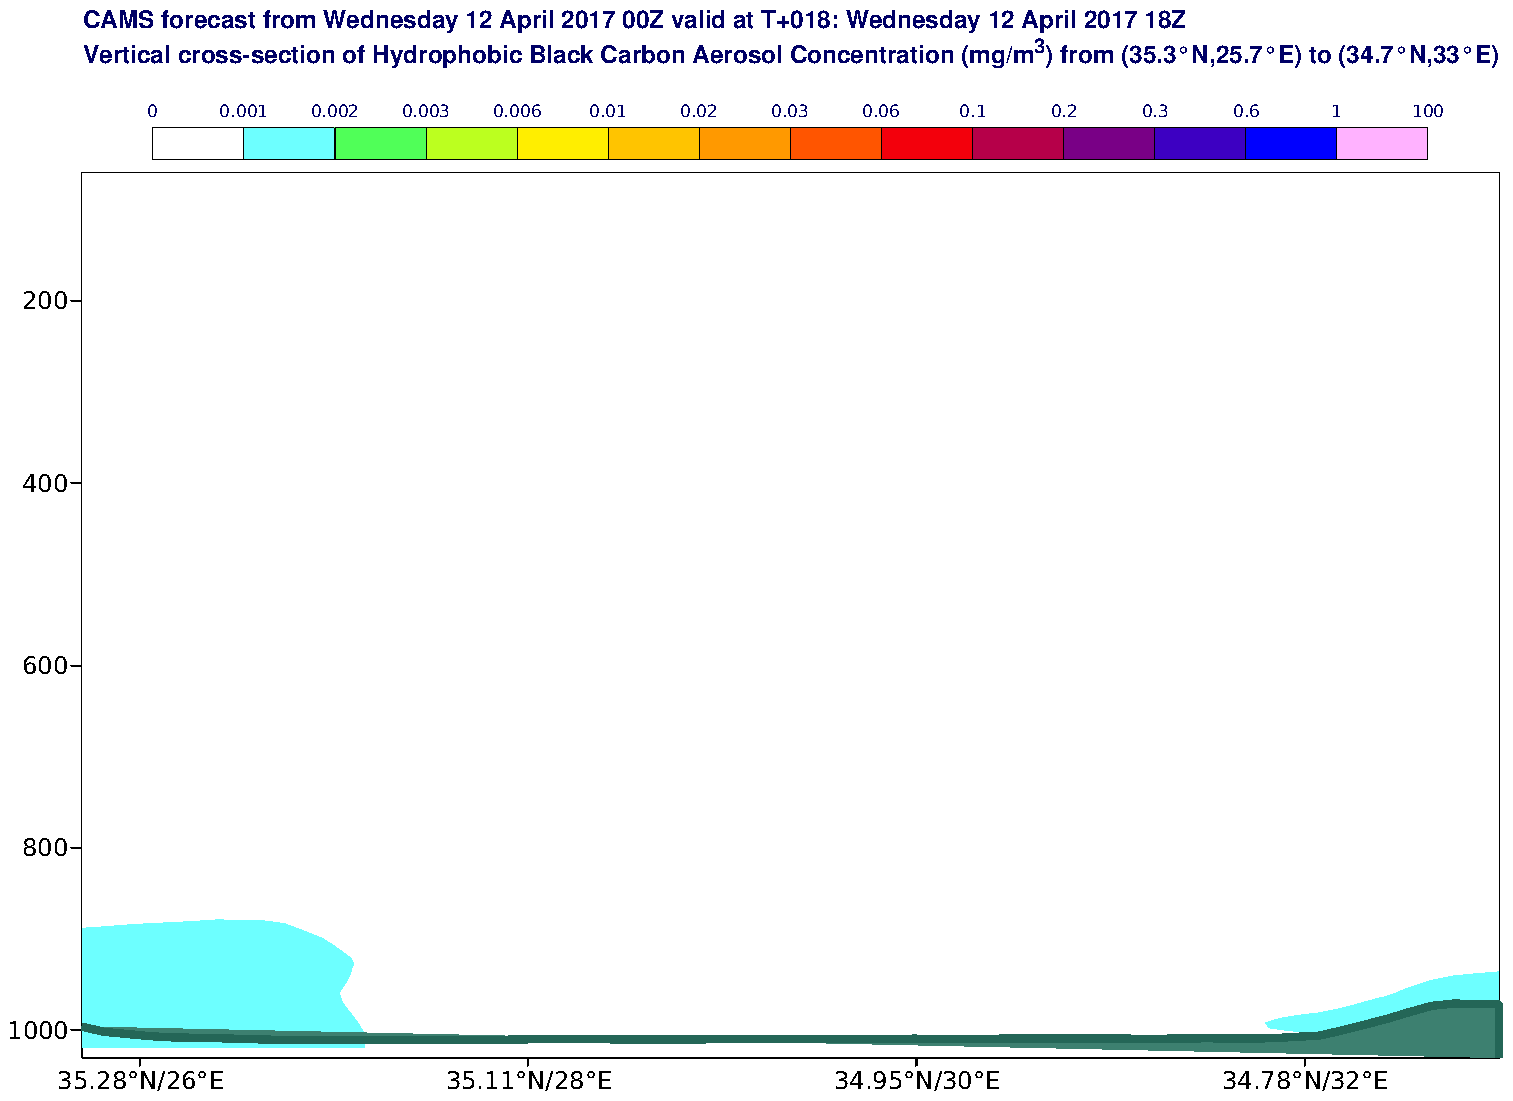 Vertical cross-section of Hydrophobic Black Carbon Aerosol Concentration (mg/m3) valid at T18 - 2017-04-12 18:00